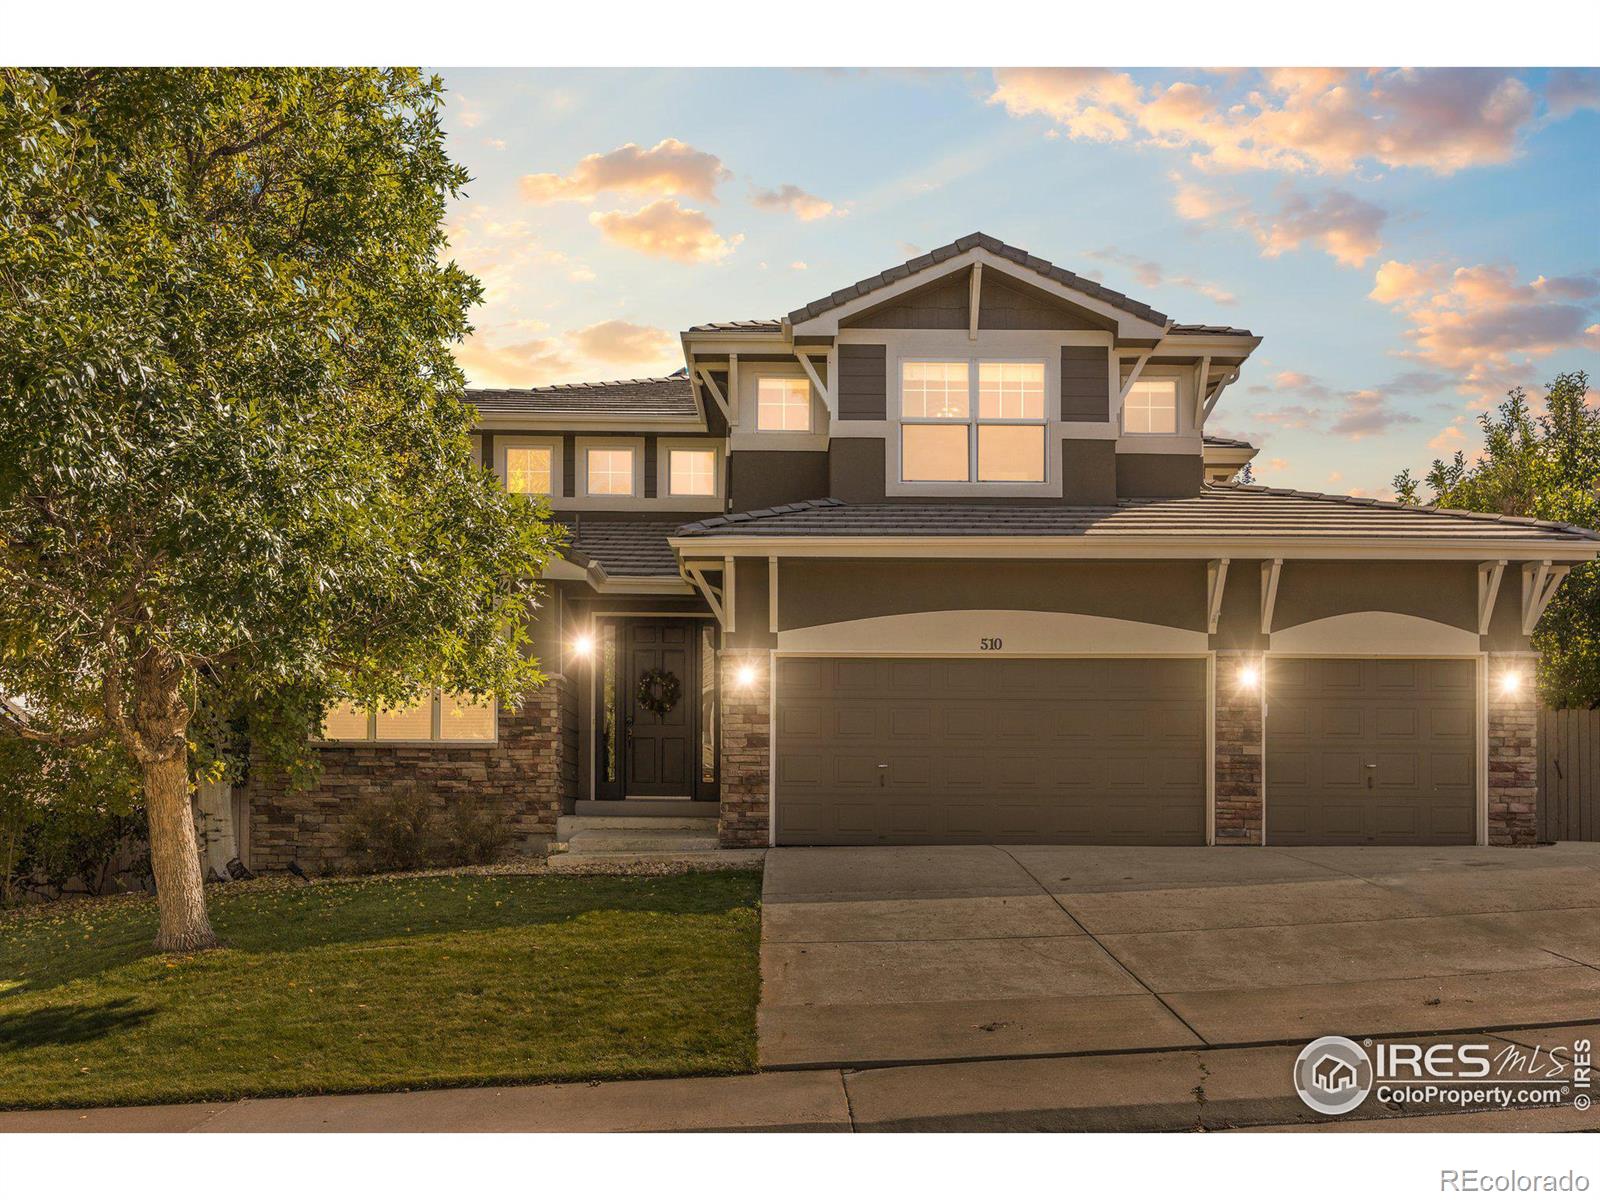 510 S Snowmass Circle, superior MLS: 4567891003632 Beds: 5 Baths: 5 Price: $1,200,000